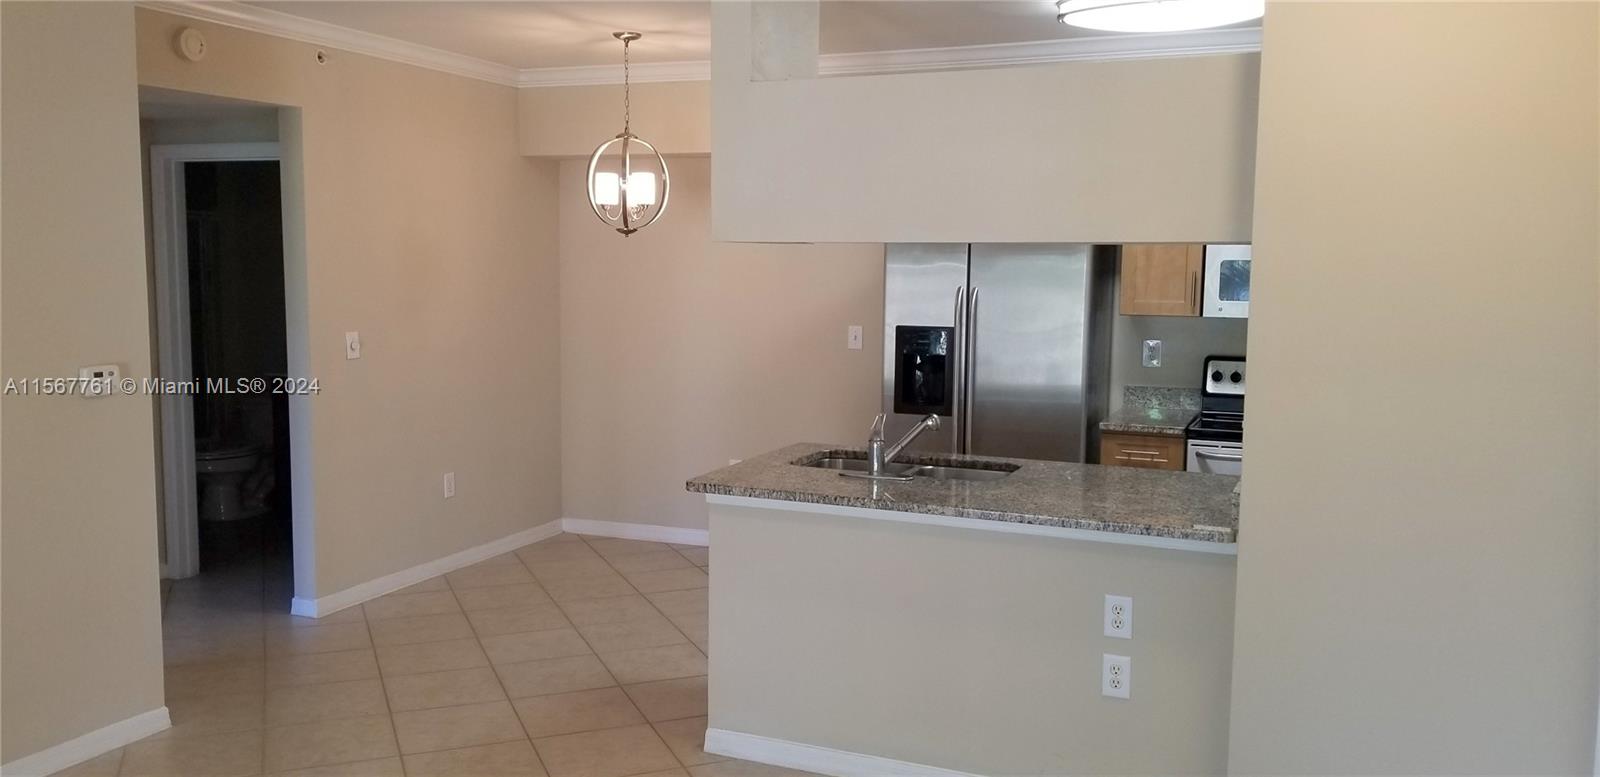 Rental Property at 6505 Emerald Dunes Dr 307, West Palm Beach, Palm Beach County, Florida - Bedrooms: 1 
Bathrooms: 1  - $1,800 MO.